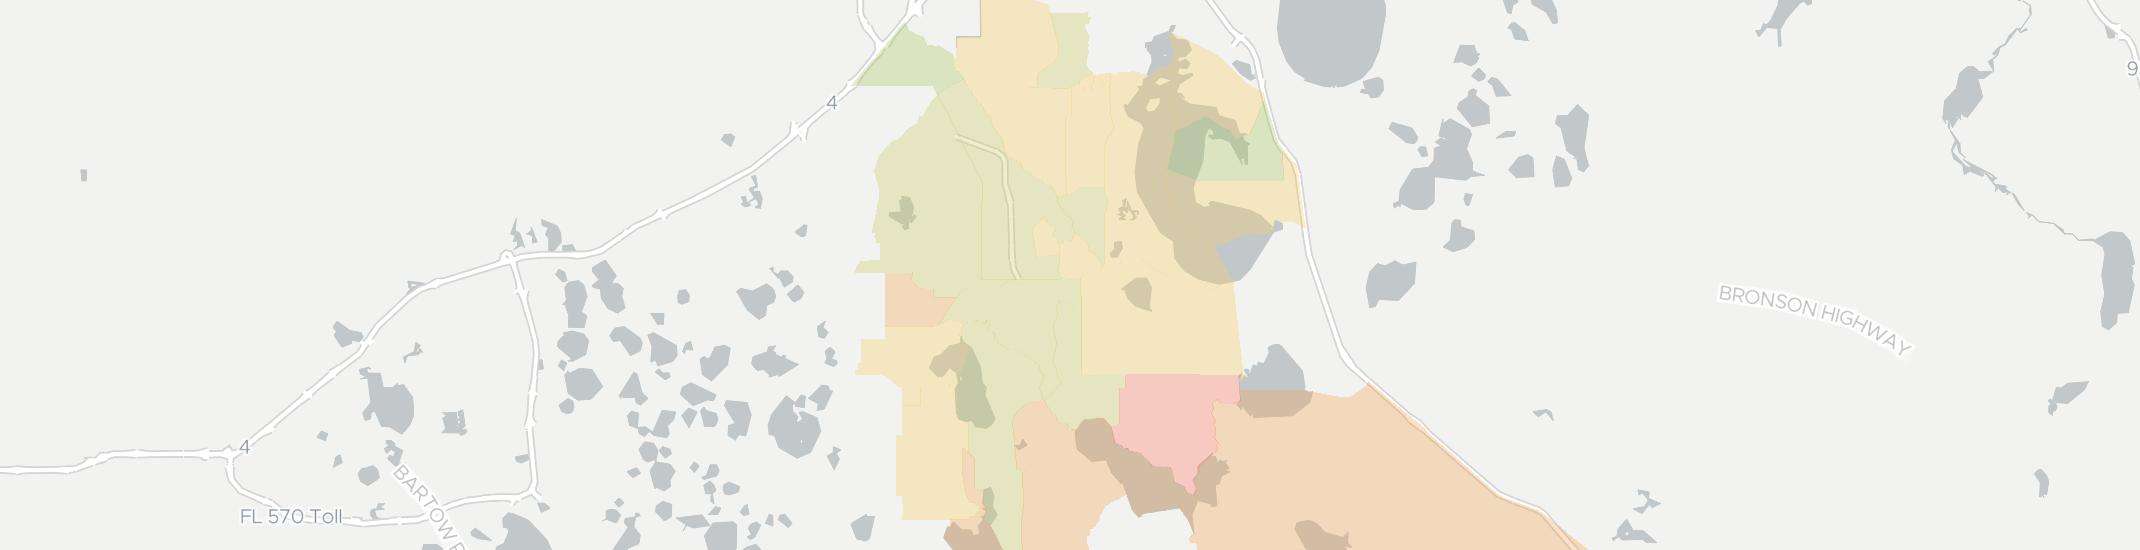 Poinciana Internet Competition Map. Click for interactive map.